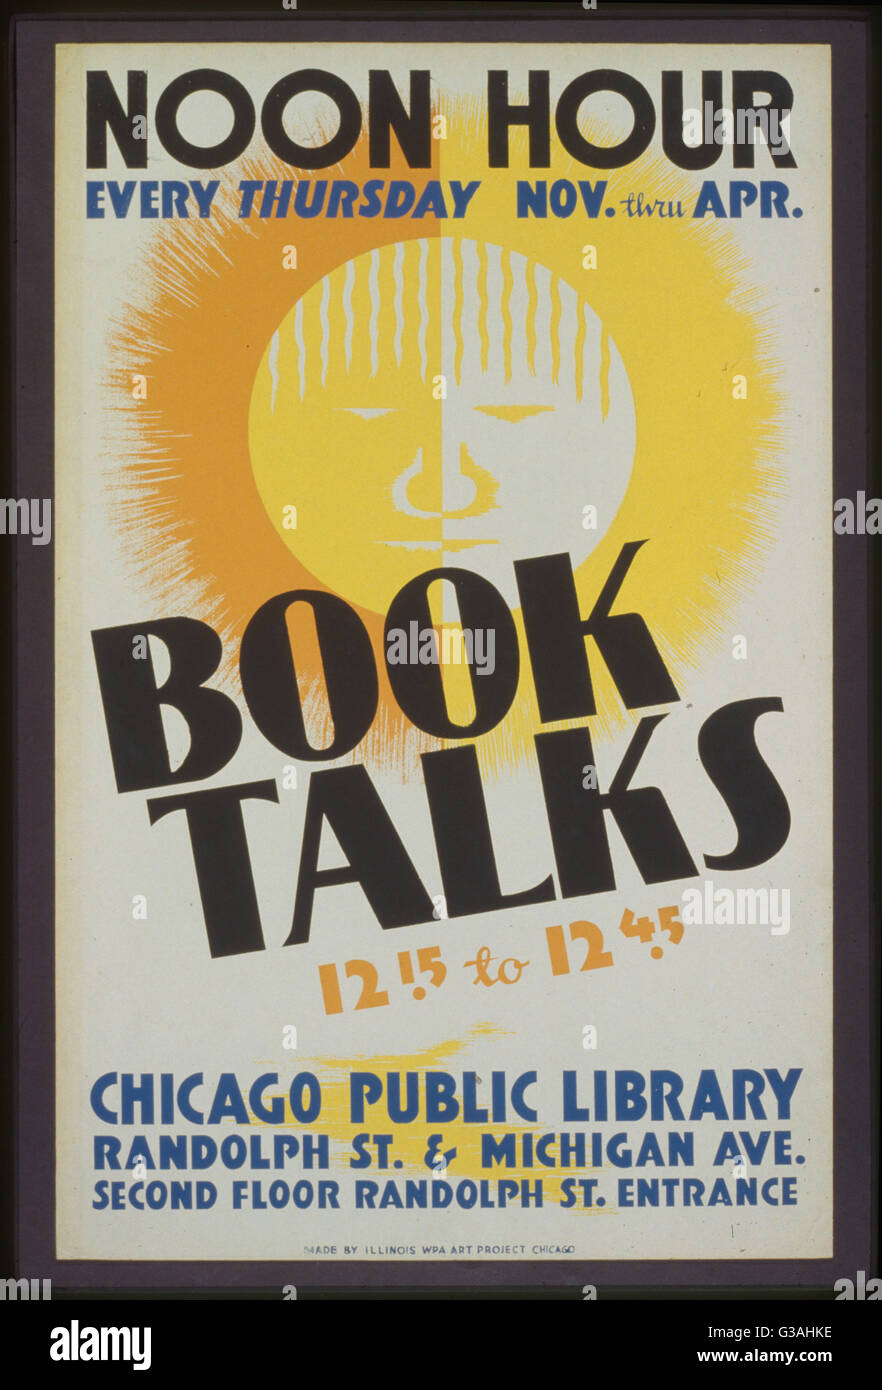 Book talks, 12:15 to 12:45 noon hour, every Thursday Nov. thru Apr. Poster for book talks at the Chicago Public Library, showing the sun. Date between 1936 and 1940. Stock Photo